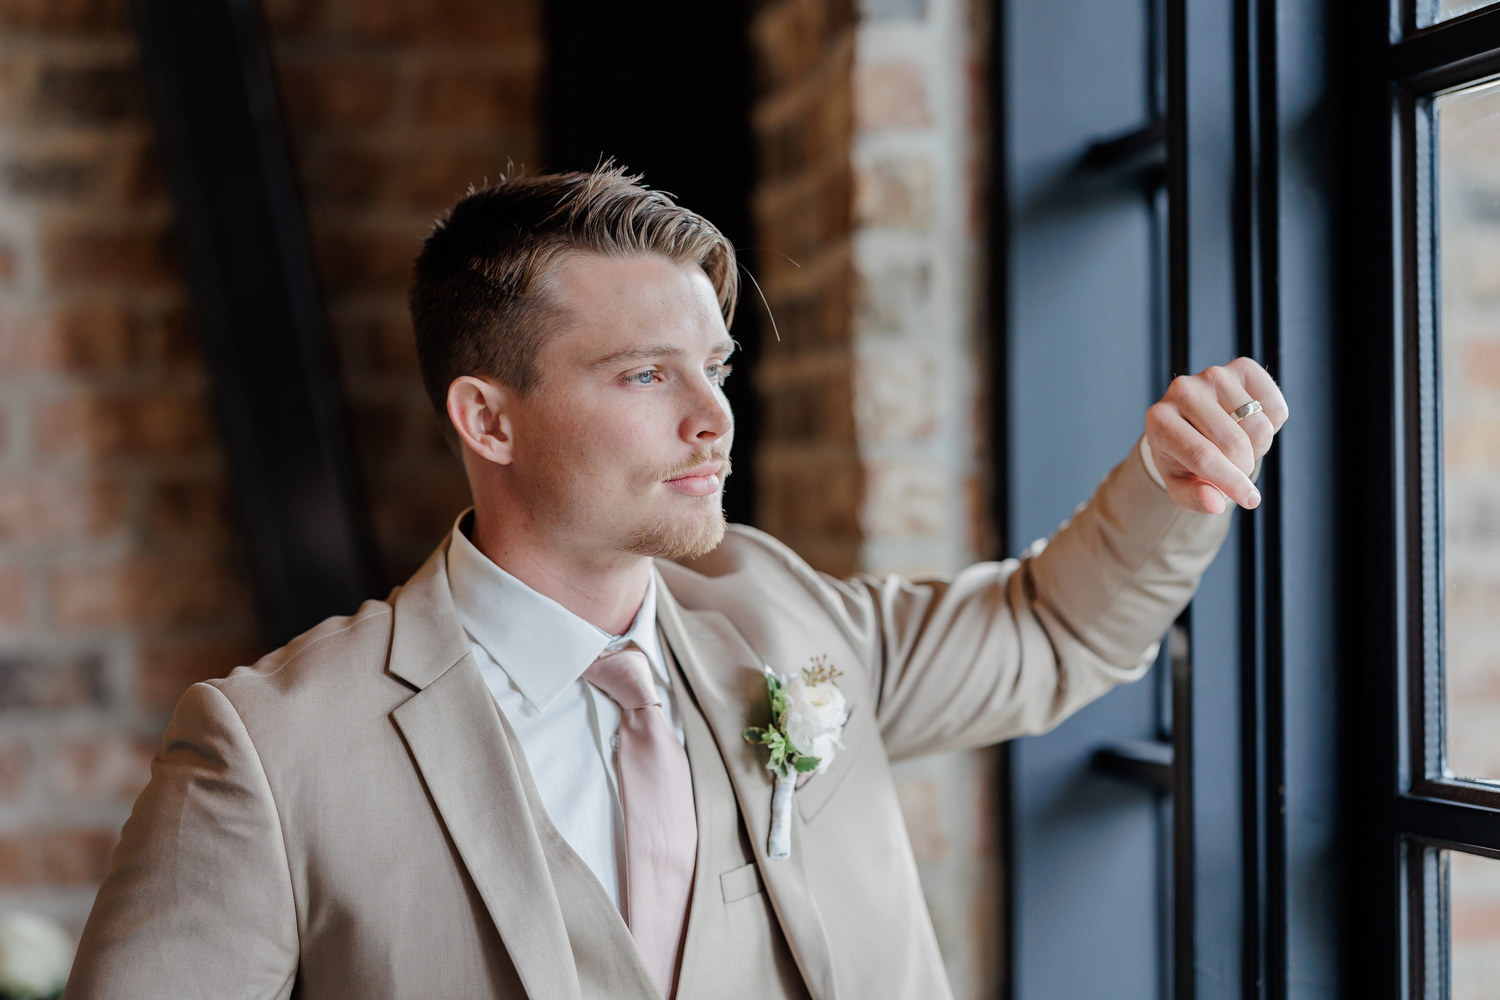 A man with a Modern Groom suit